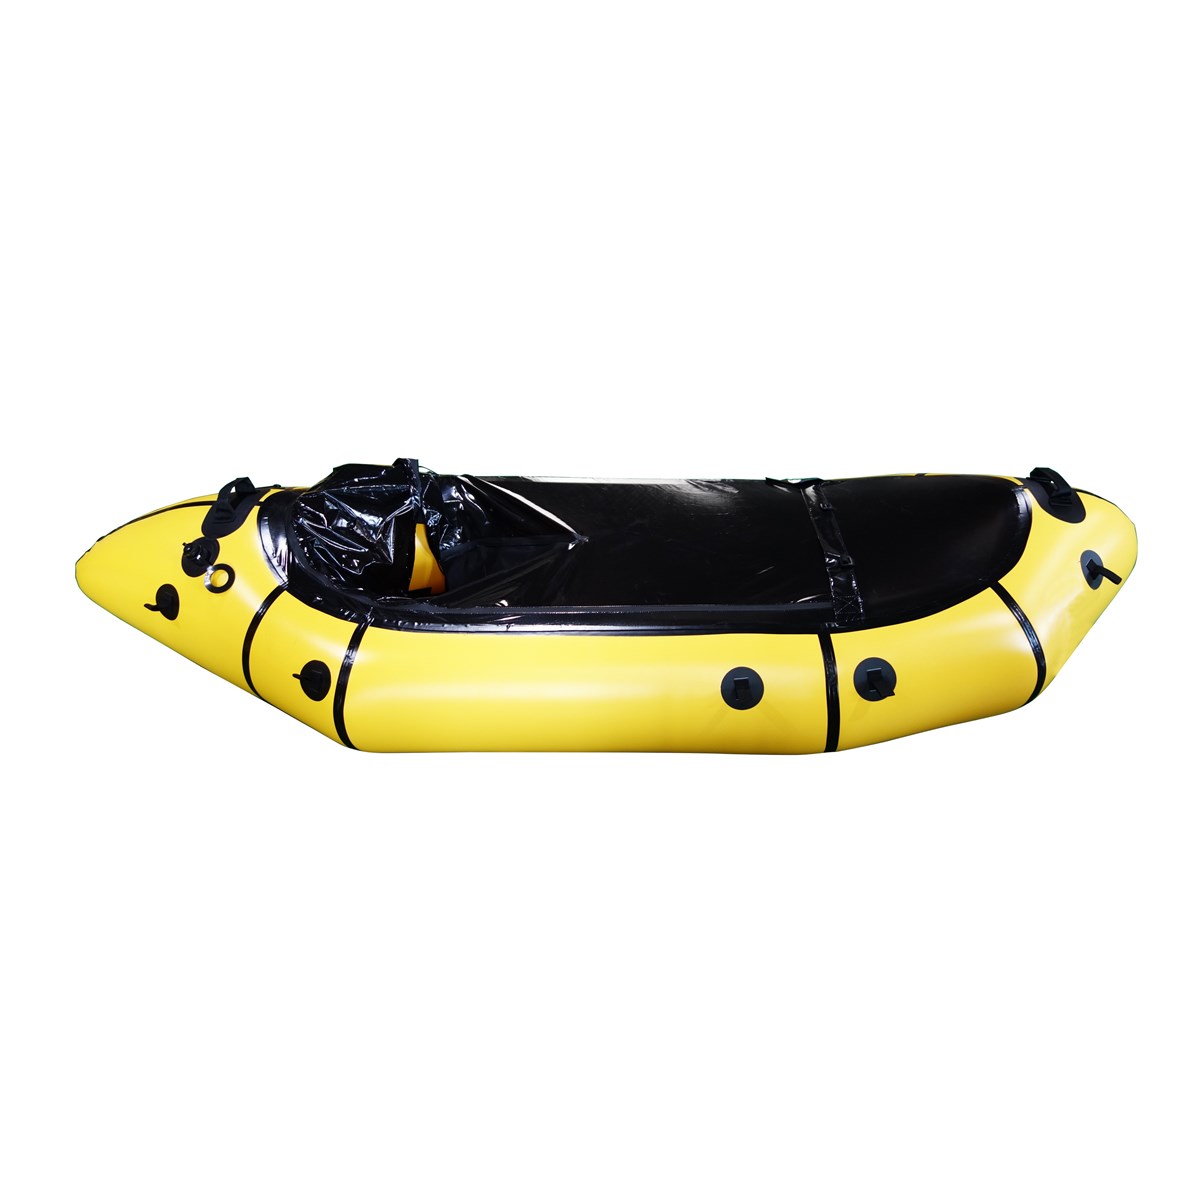 Lihgt weight tpu packrafts with tizip inflatable rafts river boat for whitewater